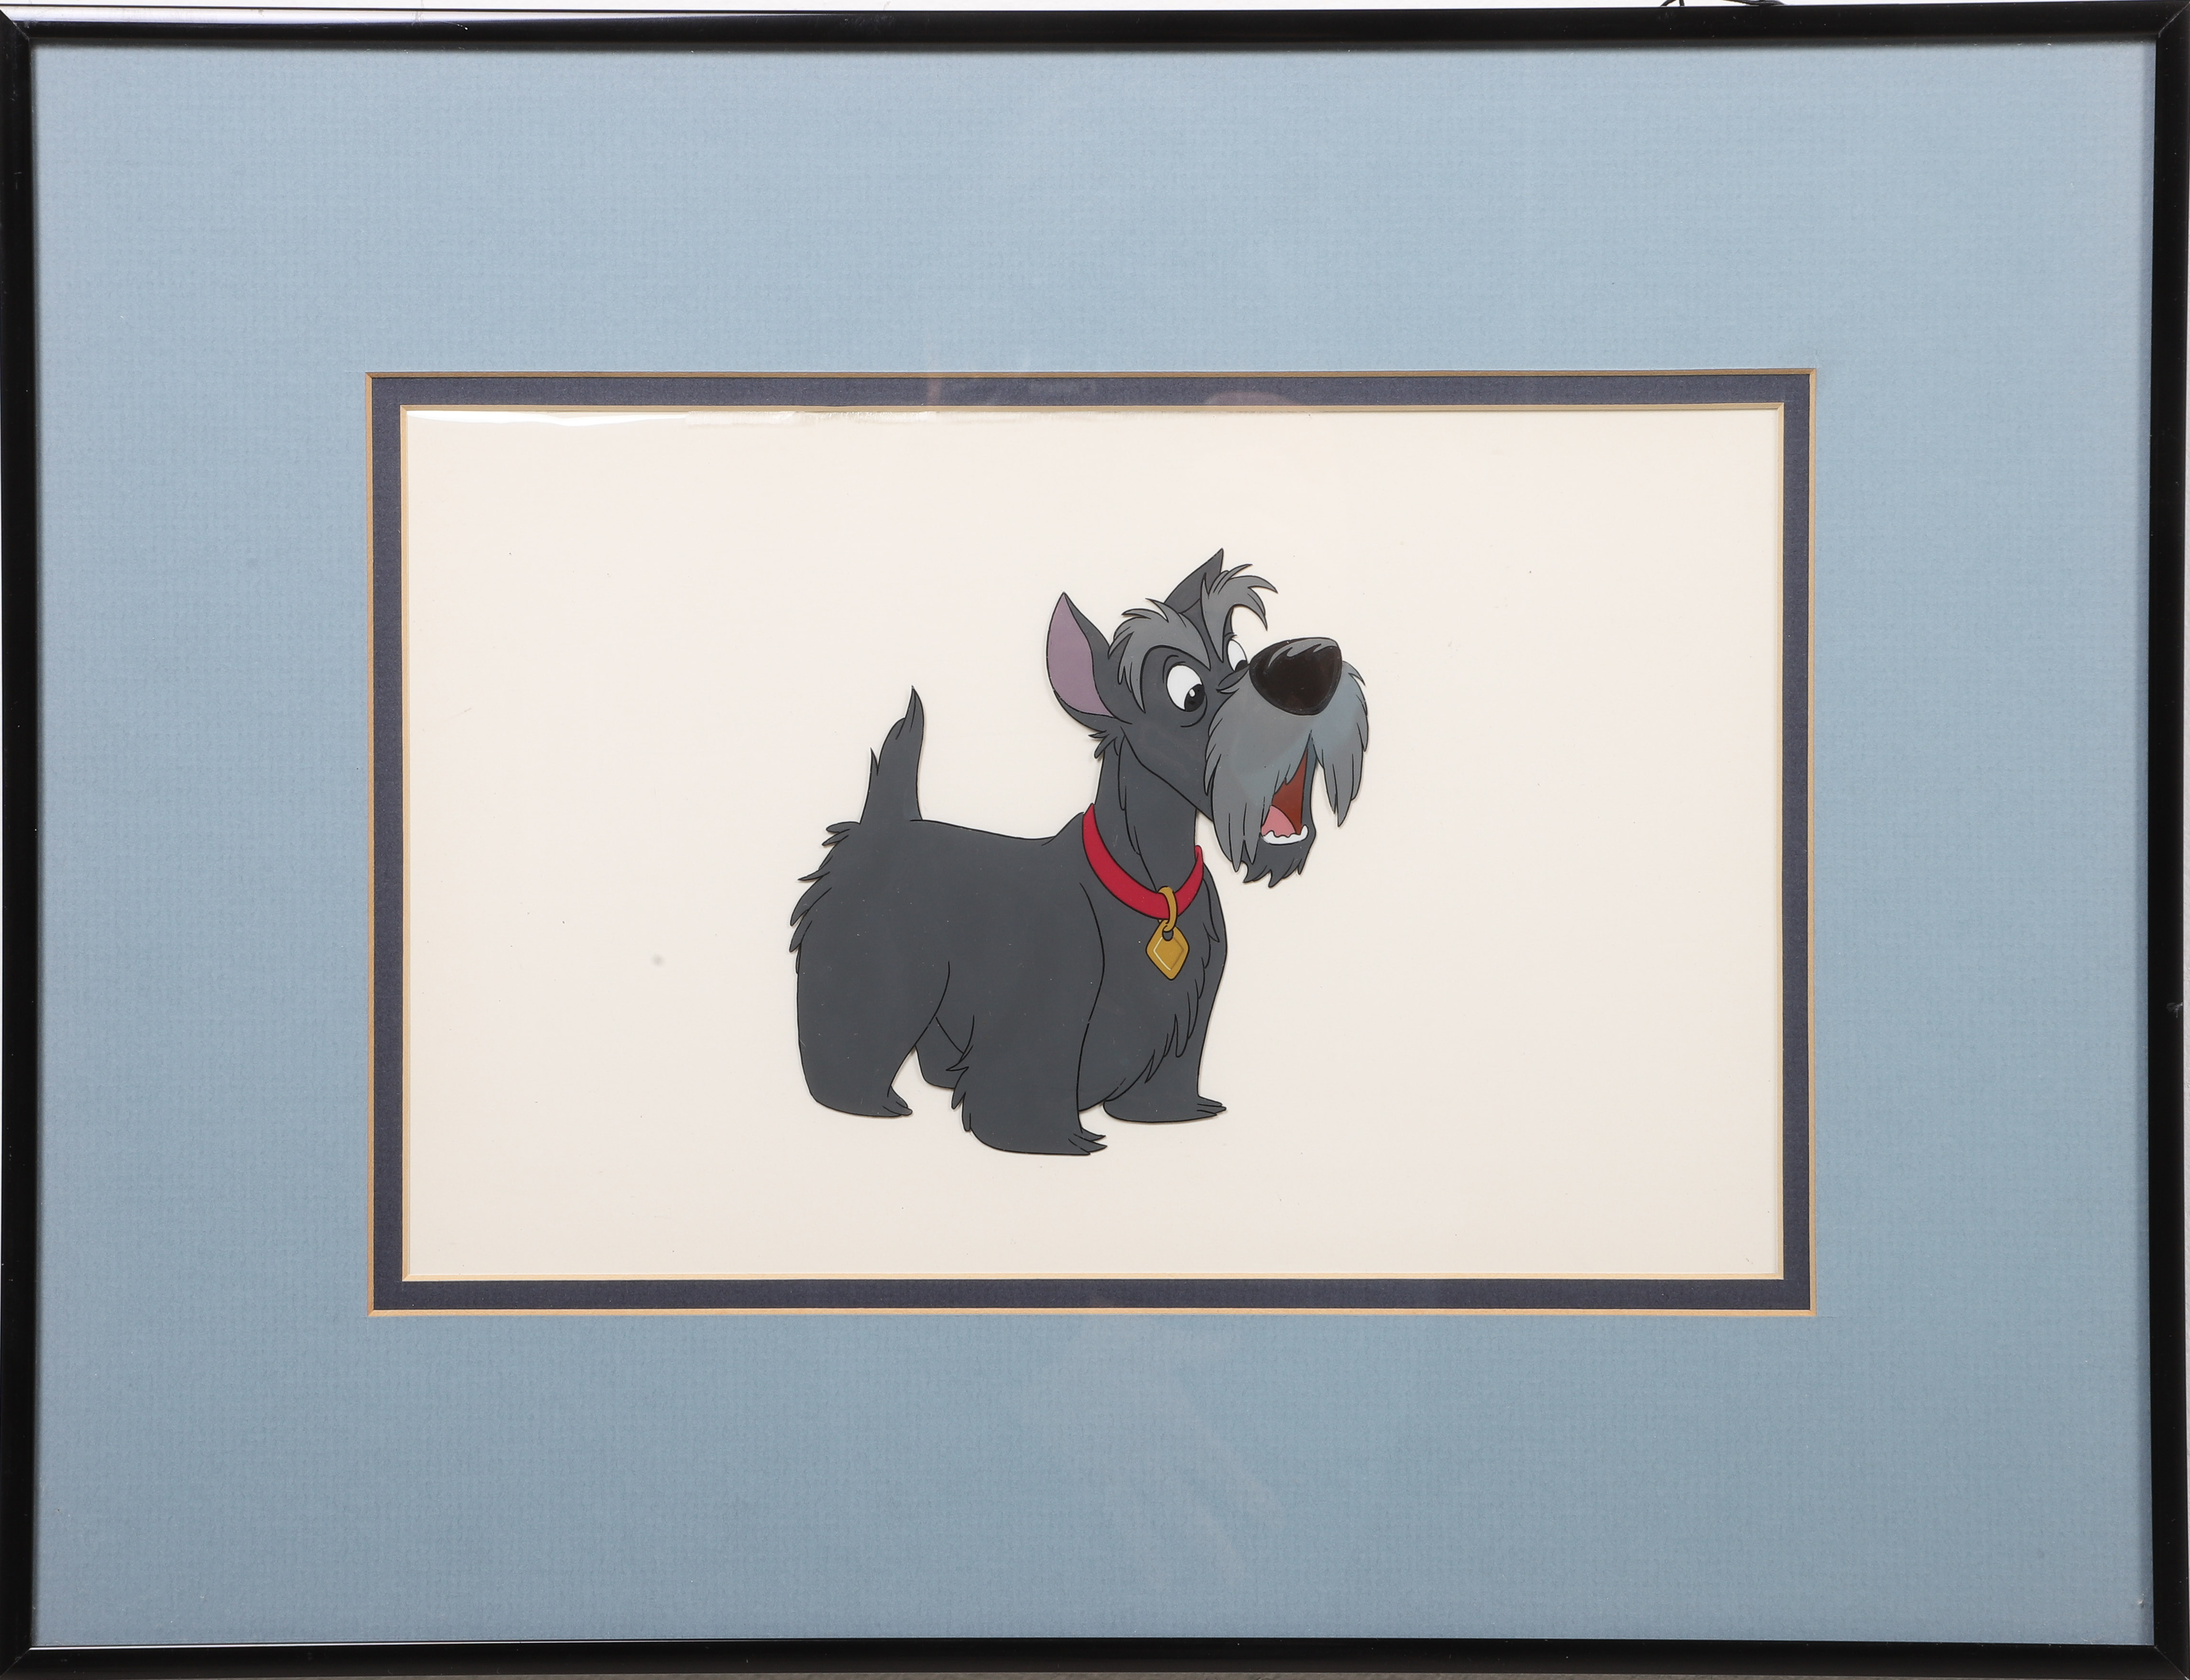 Lady and the Tramp production cel 2e1cae